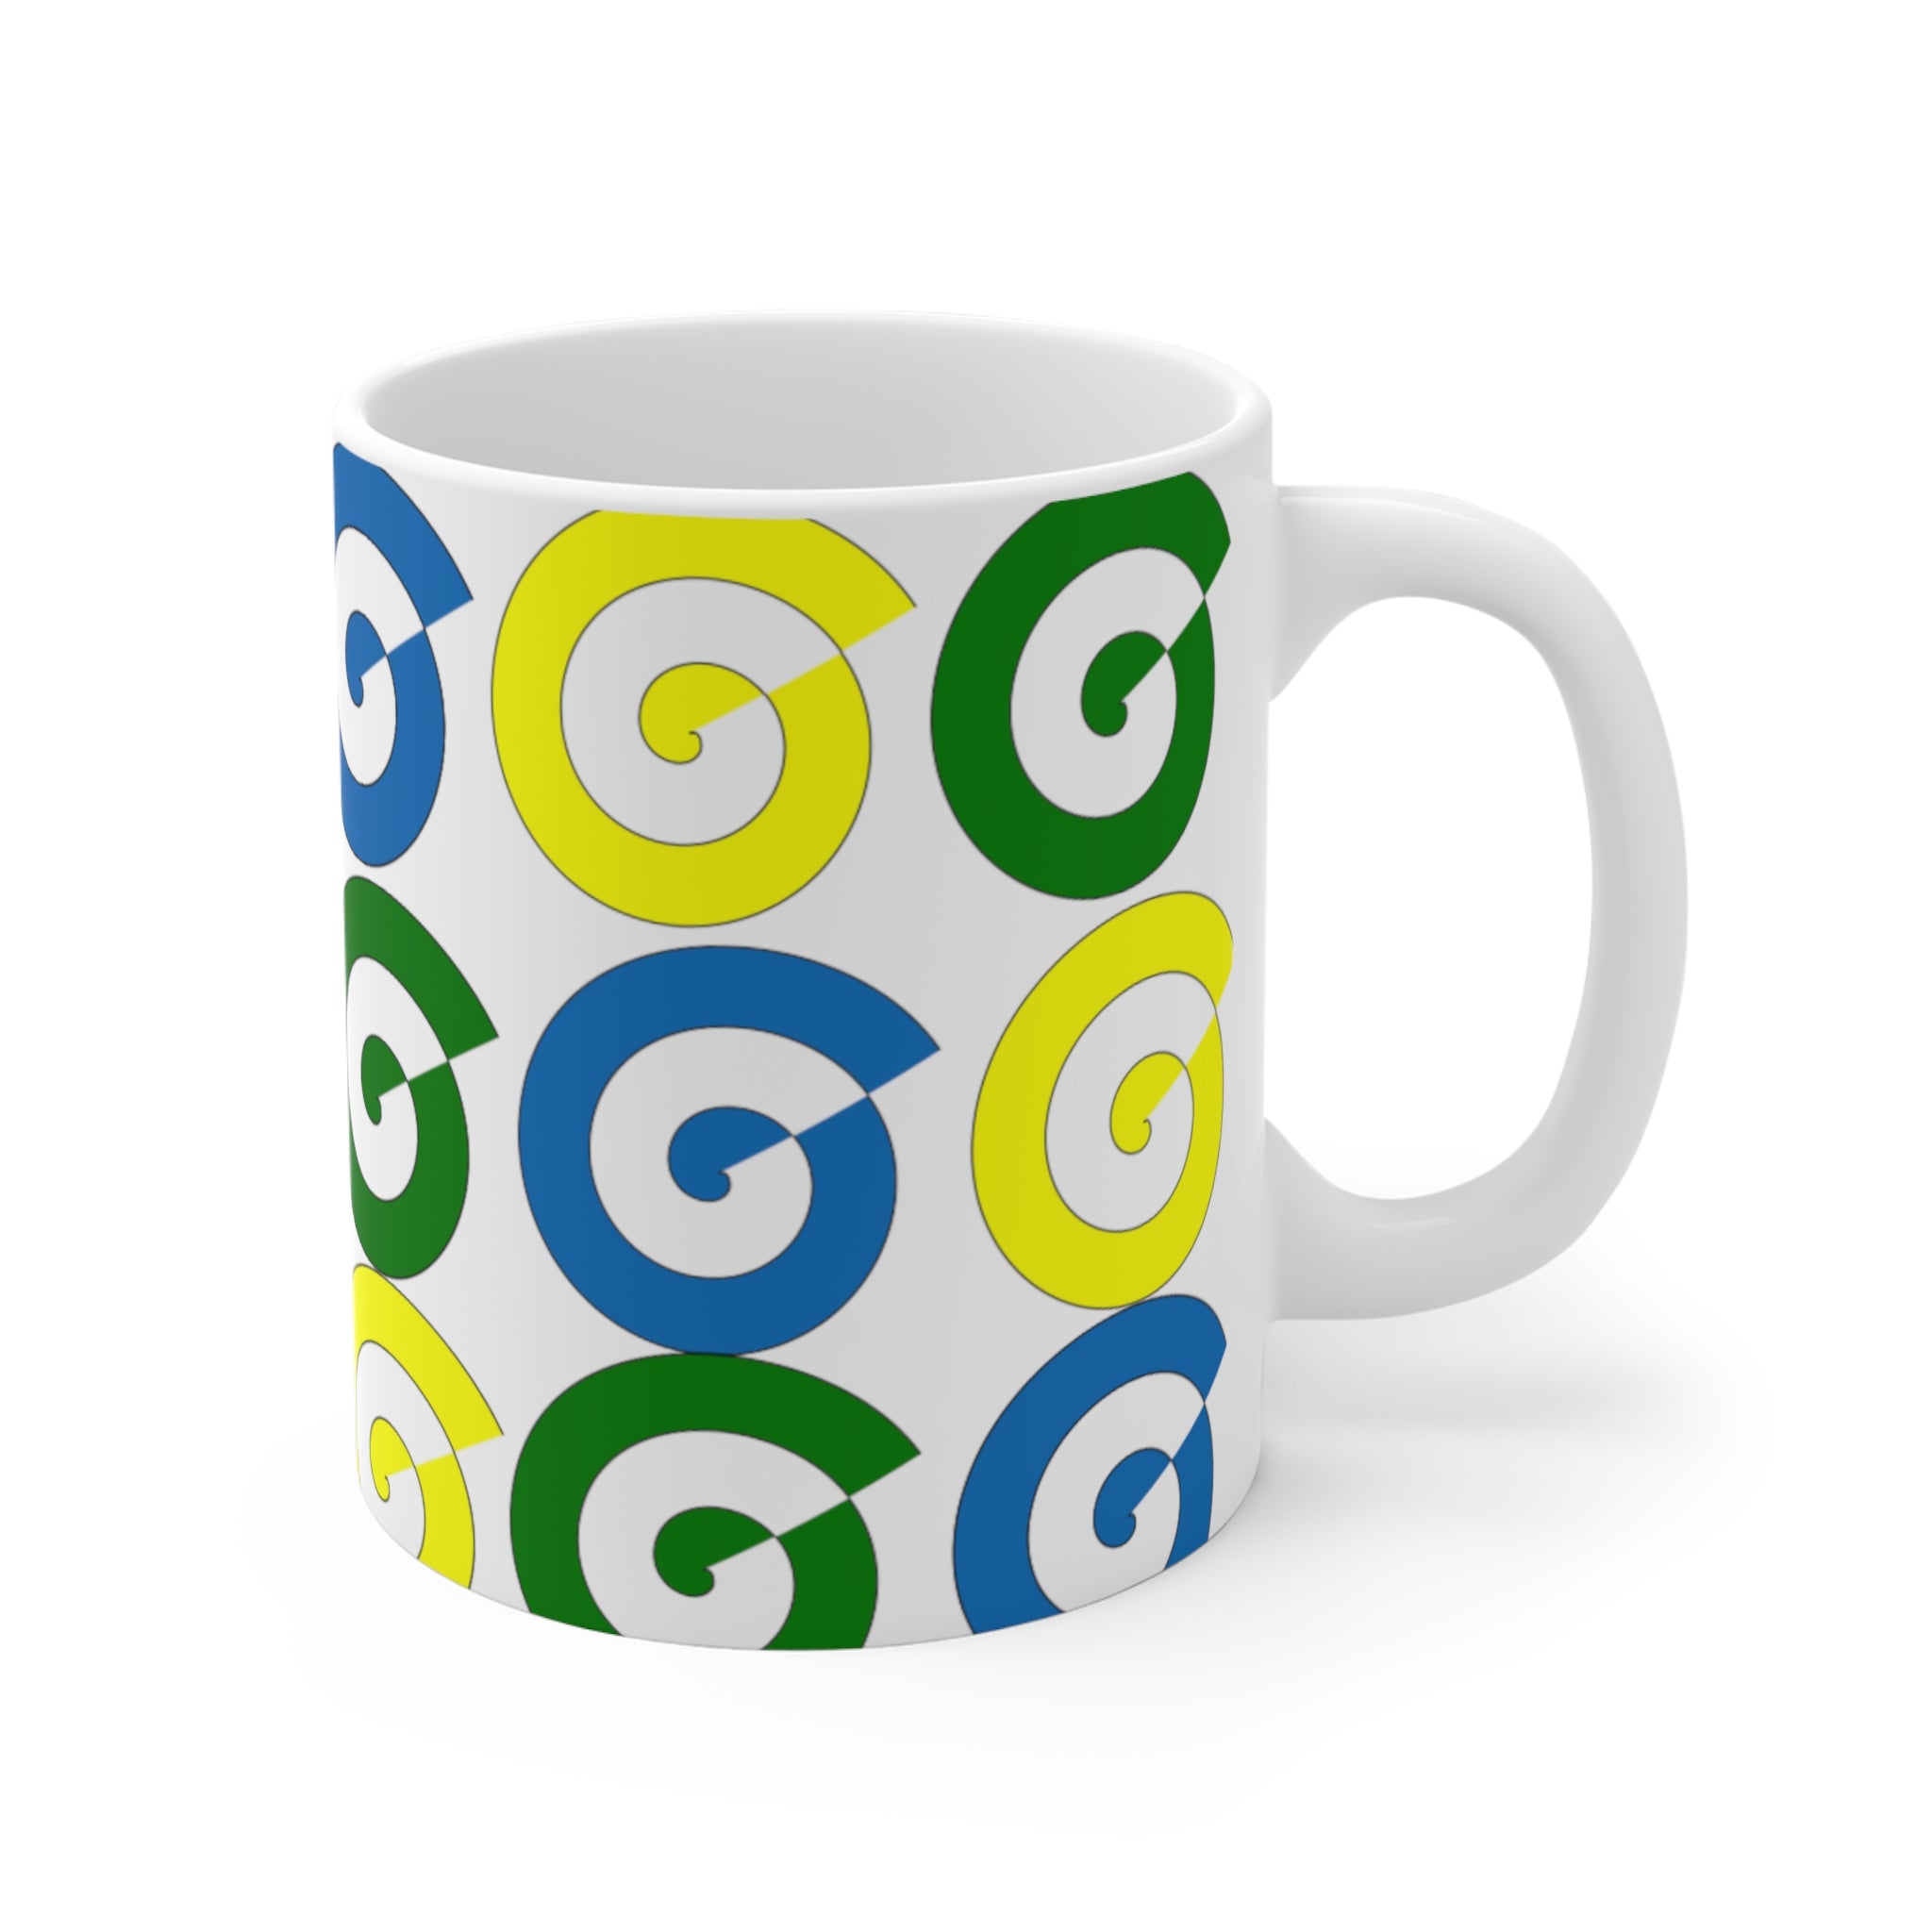 11 oz ceramic mug with a St. Vincent and the Grenadines independence colored spirals